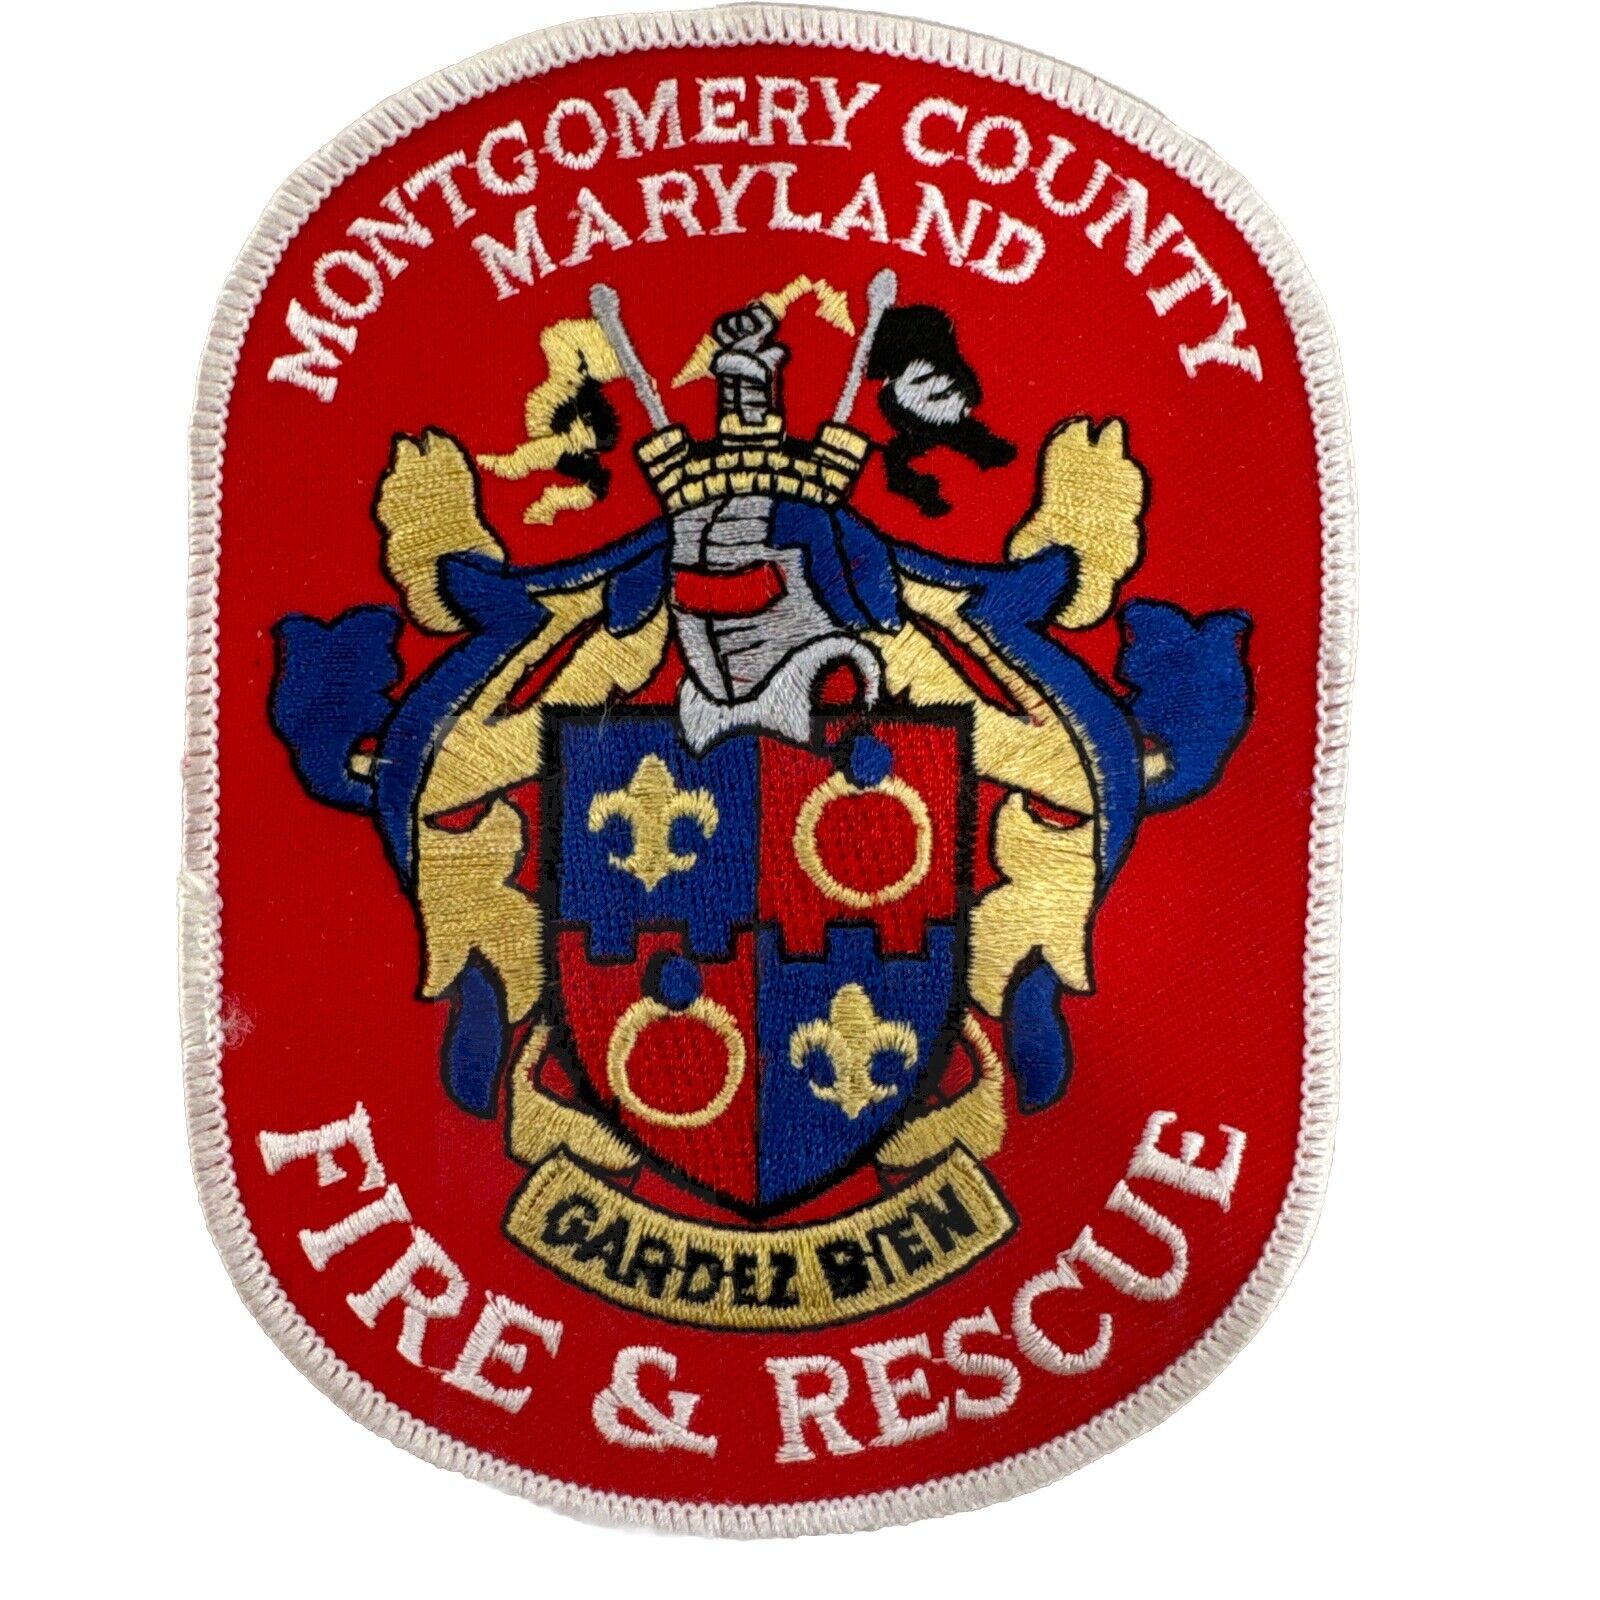 Vintage Montgomery County Maryland Fire Rescue Patch 5”